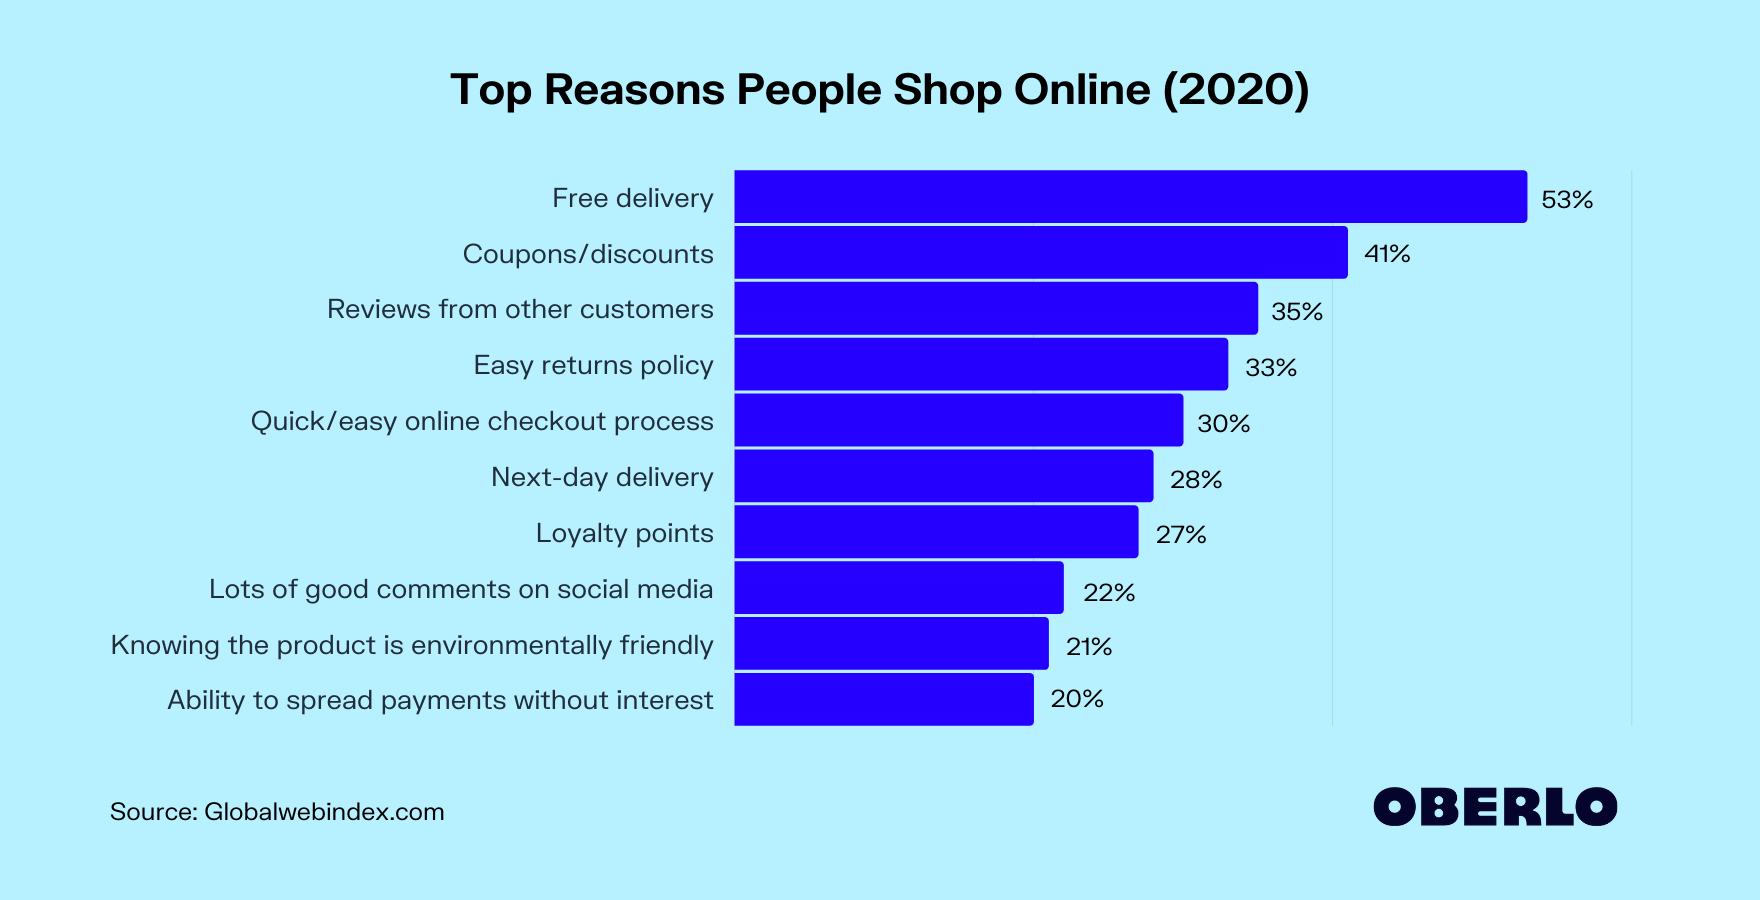 Top 10 Reasons to Shop Online